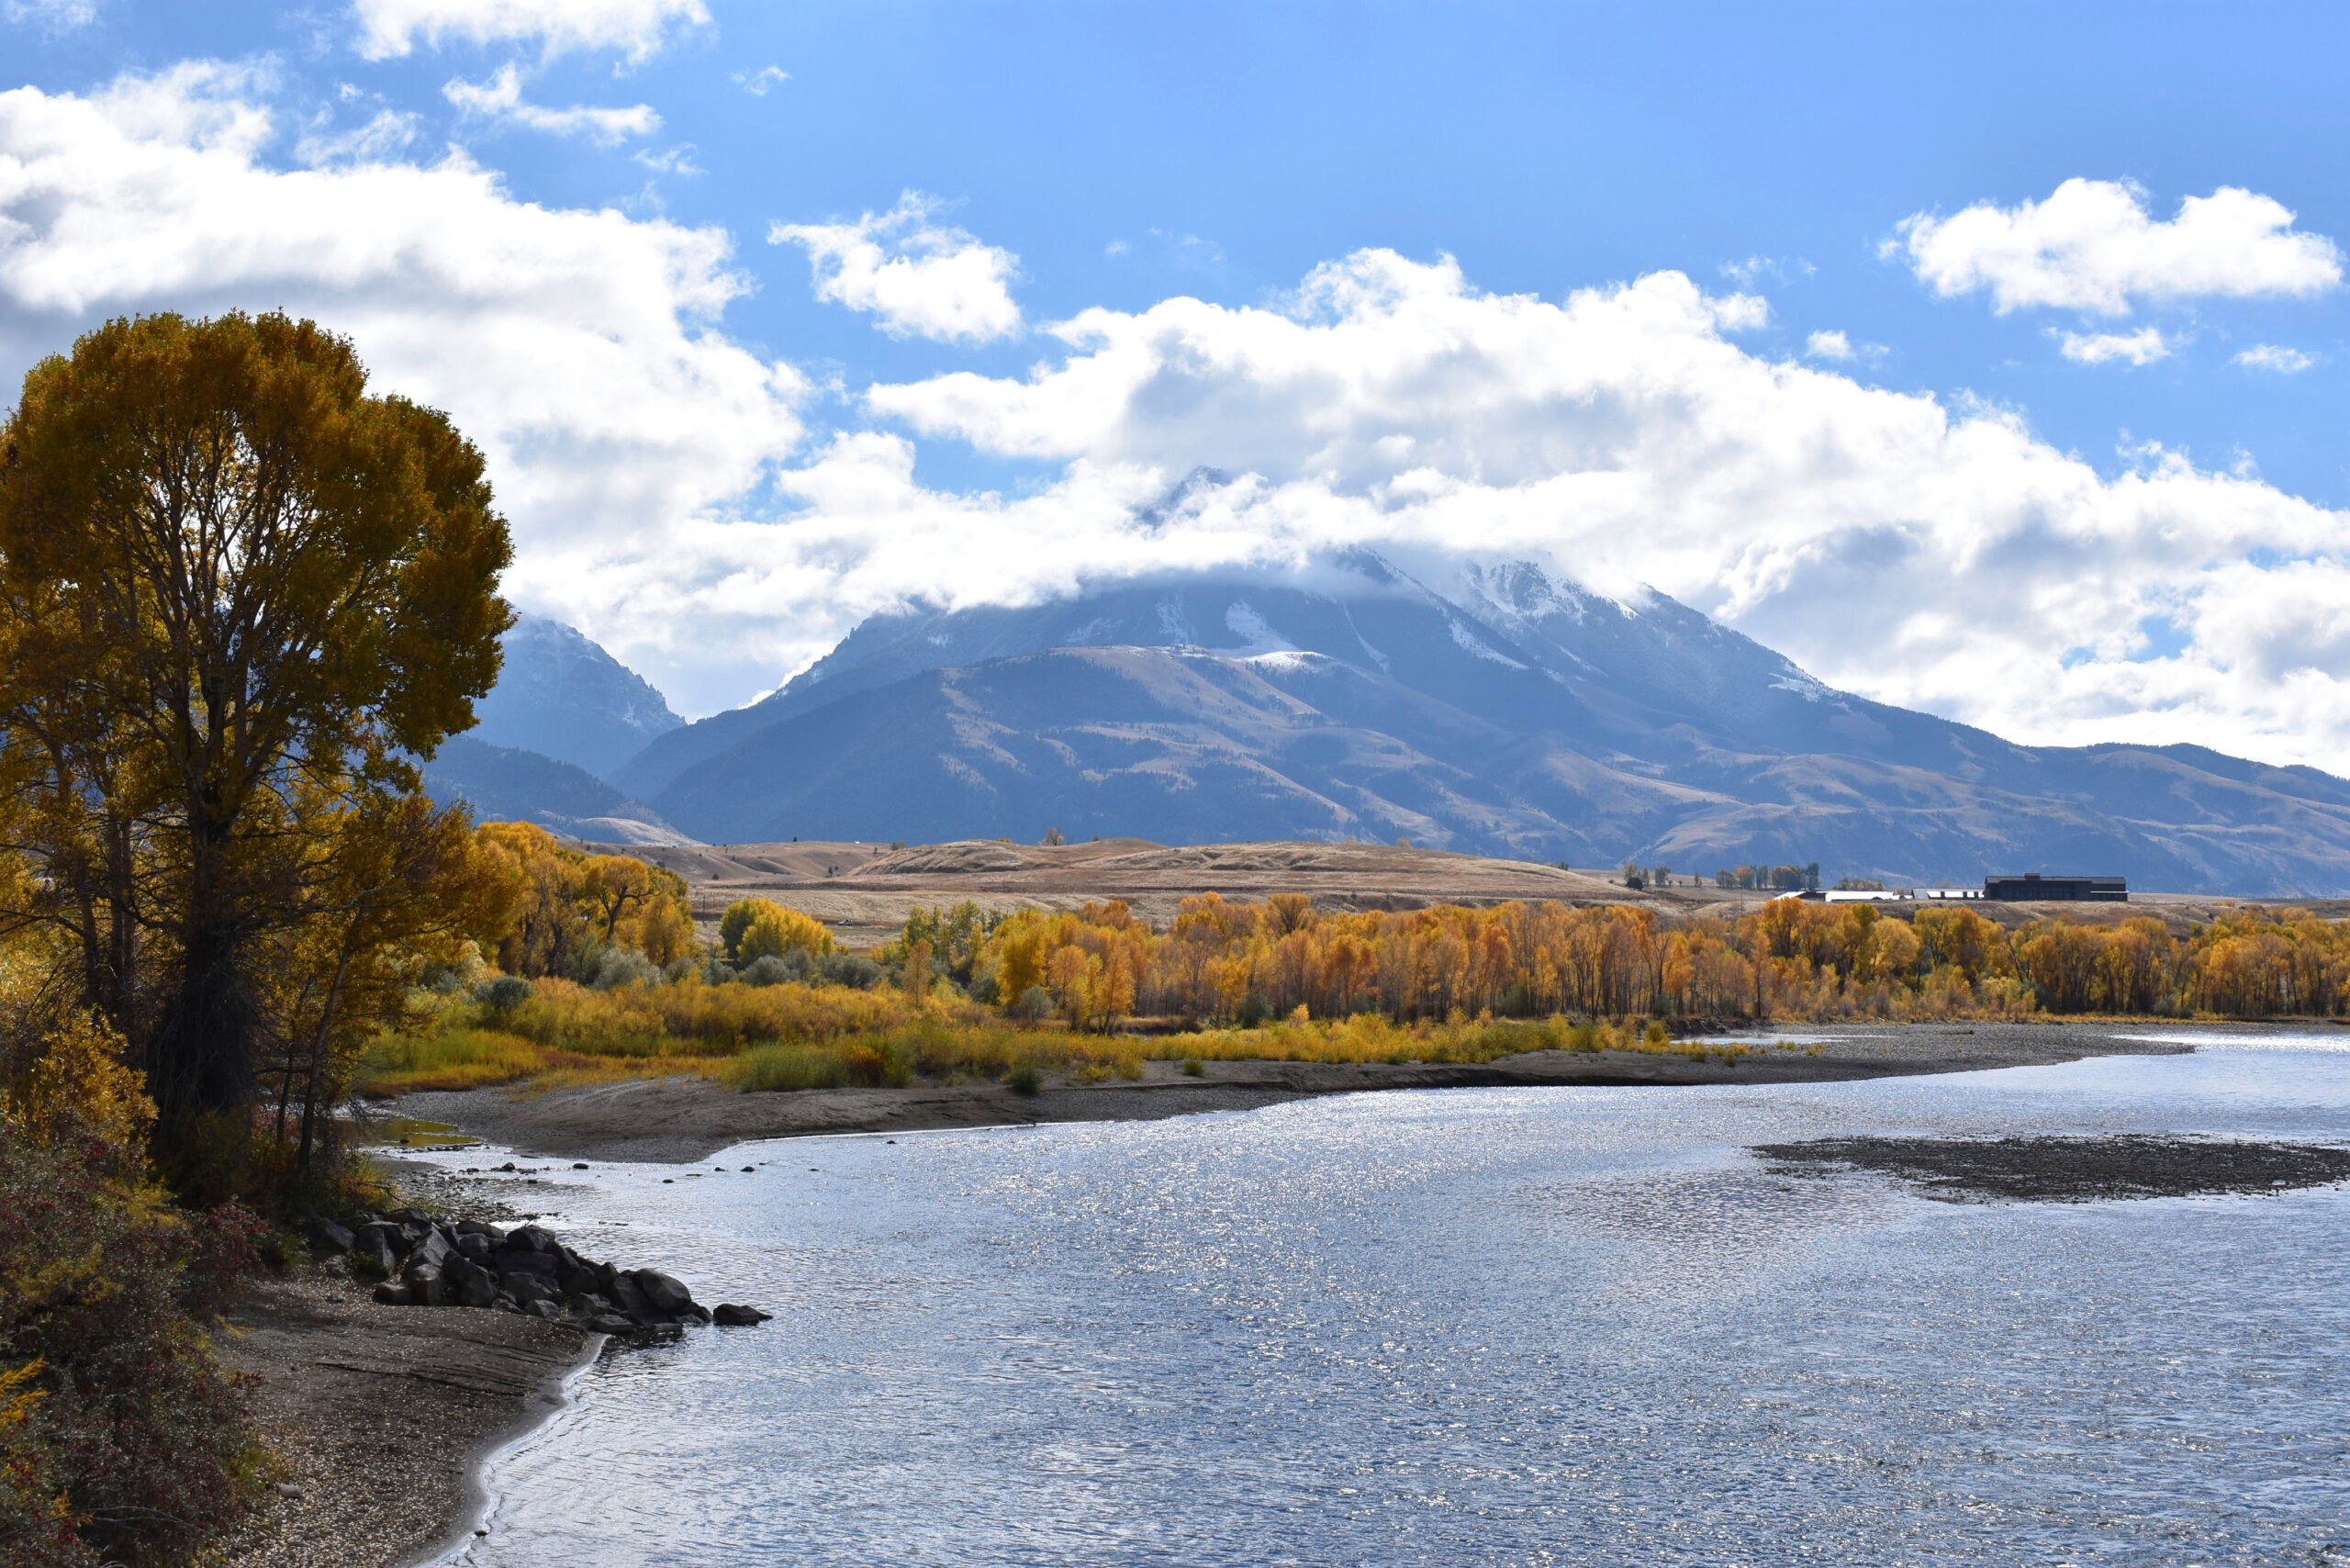 Emigrant Peak rises above the Paradise Valley and the Yellowstone River.
(Matthew Brown / AP)